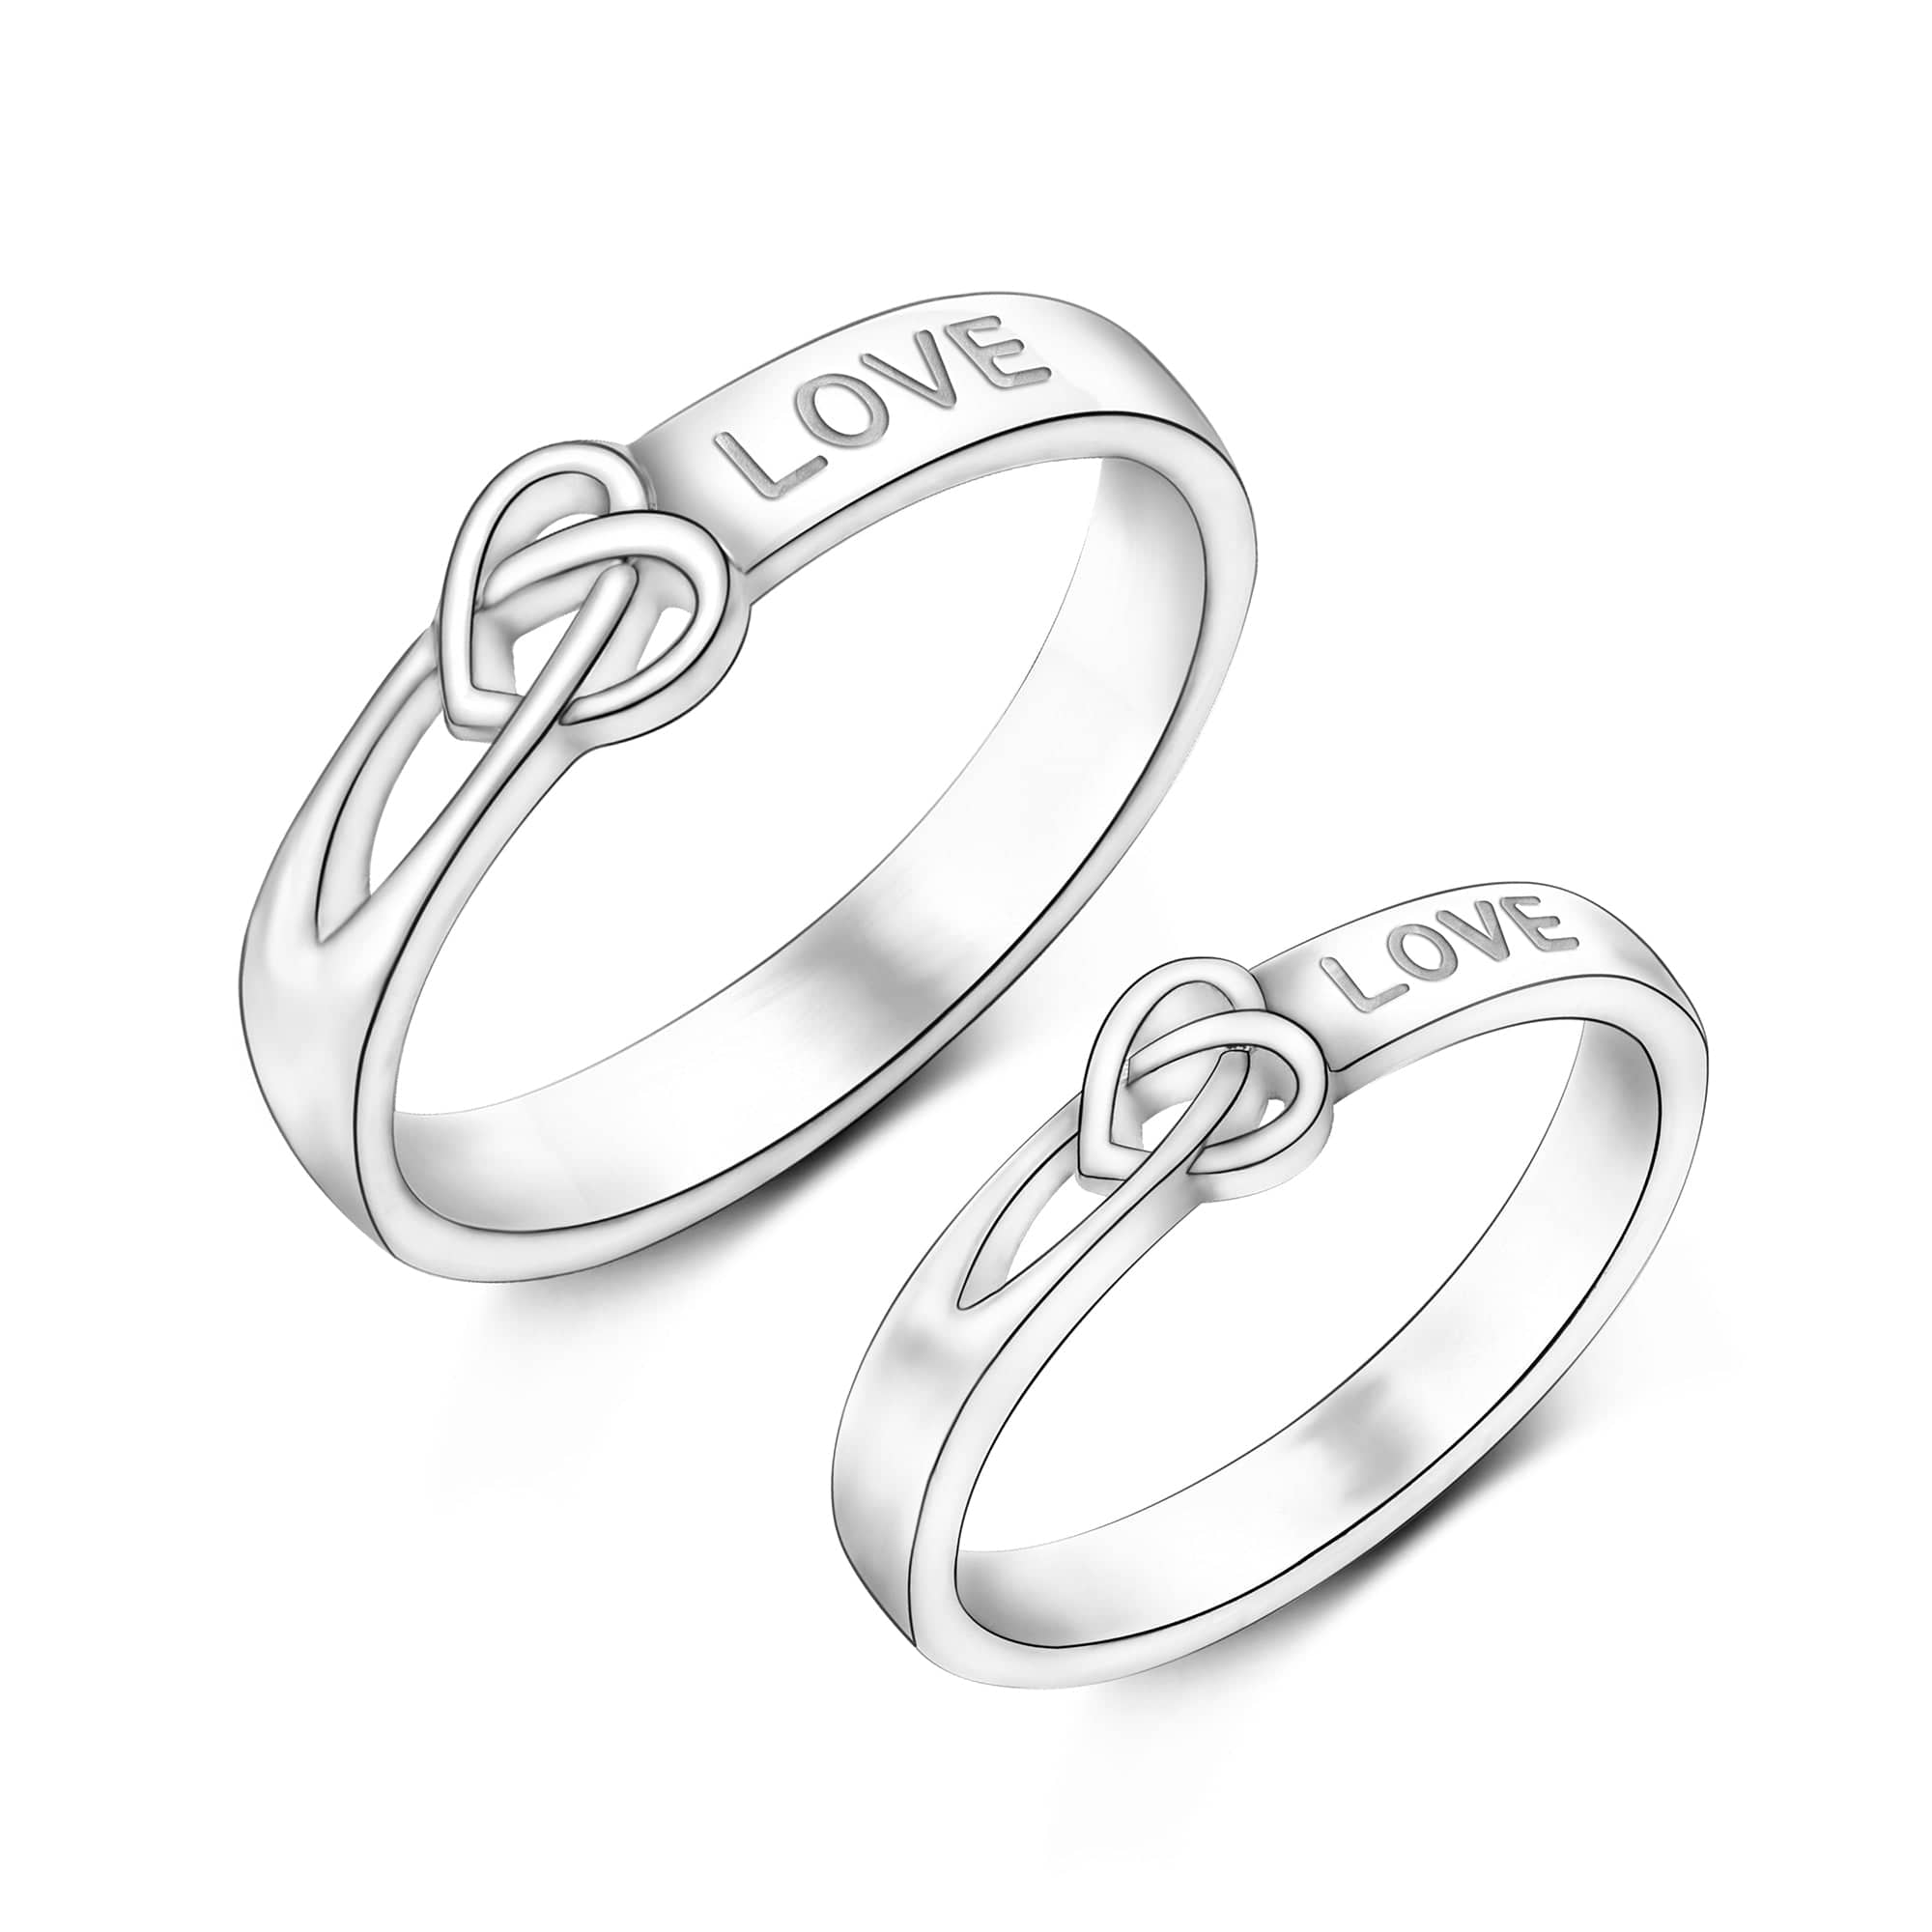 Copper Plated Platinum Resizeable Twist Crystal Infinity Couple Rings Silver  Adjustable Engagement And Wedding Accessory For Men And Women Crossing  River Of Love Finger Jewelry From Godhelpnewa, $2.2 | DHgate.Com